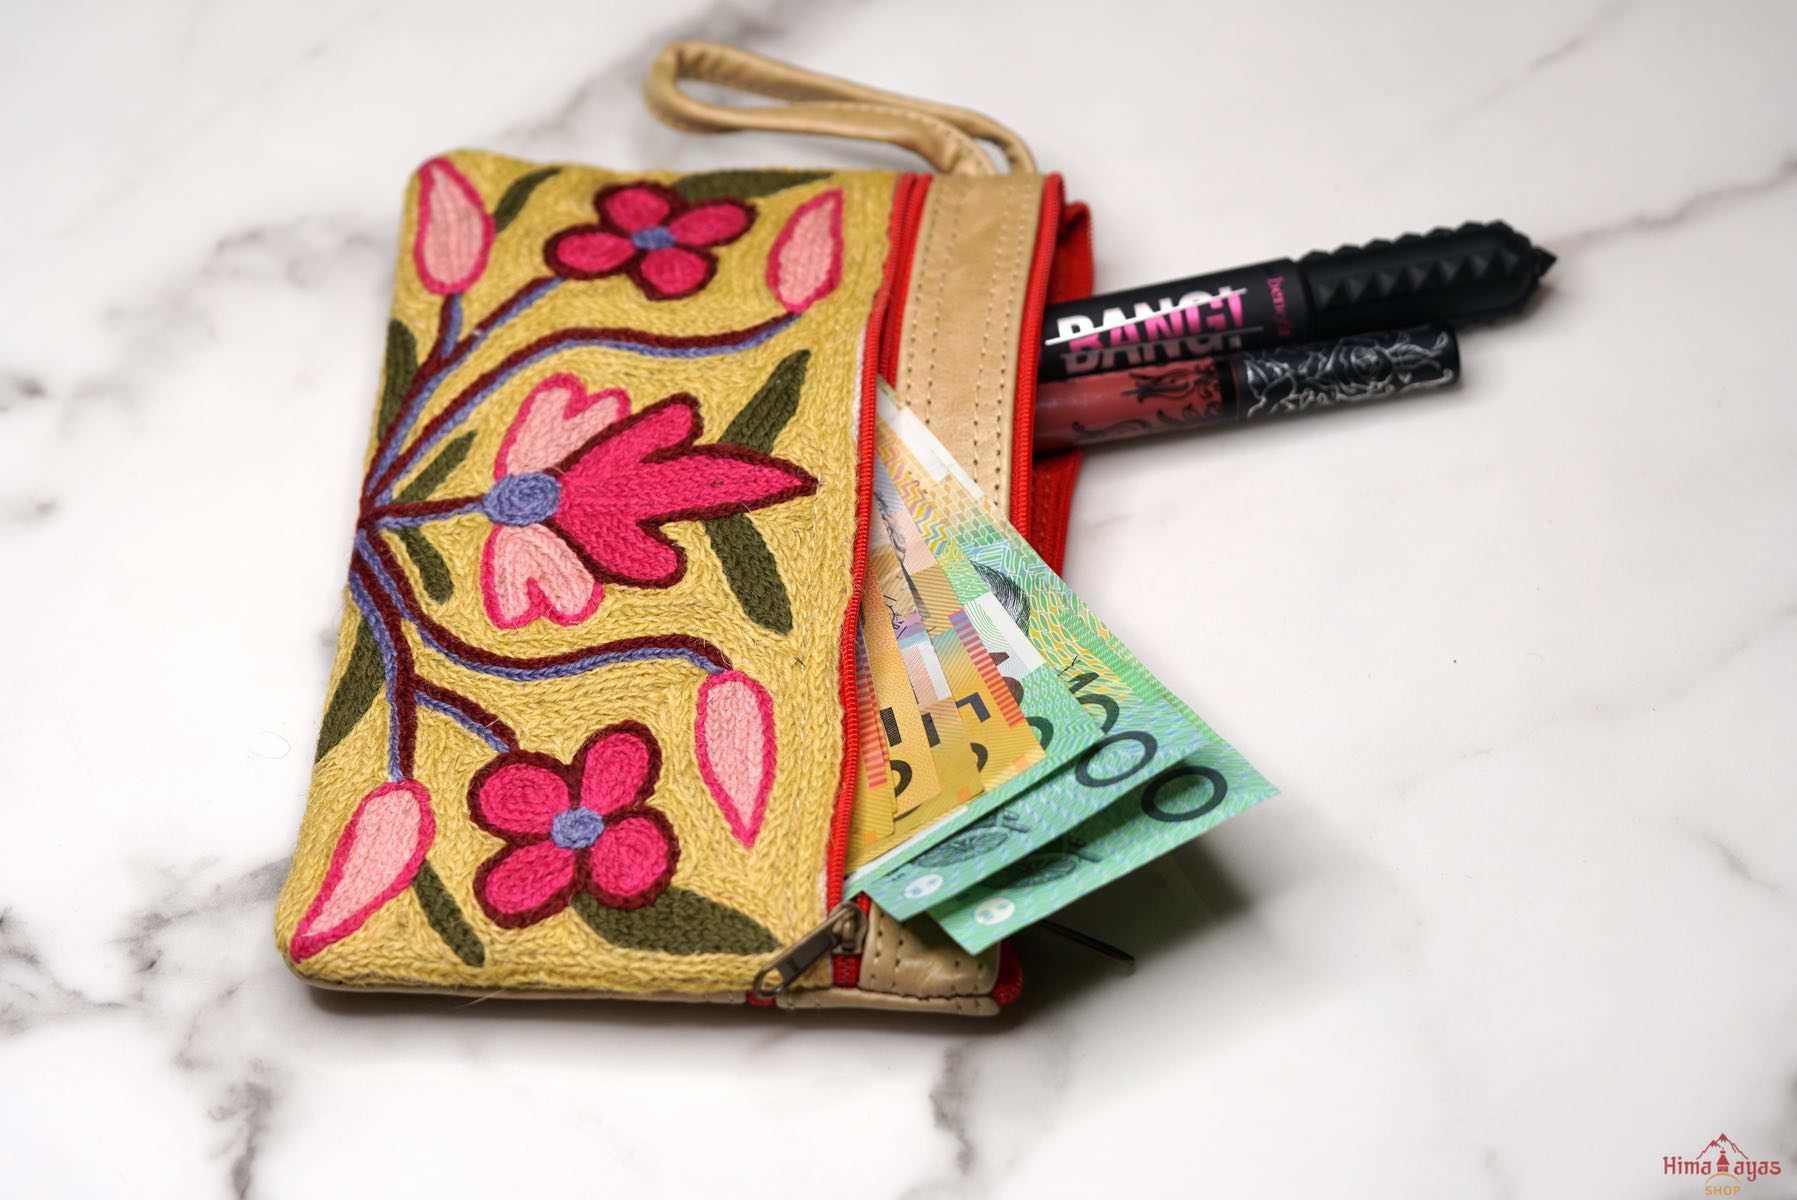 A lightweight everyday use purse with floral hand-embroidery design that suits everyone's style!